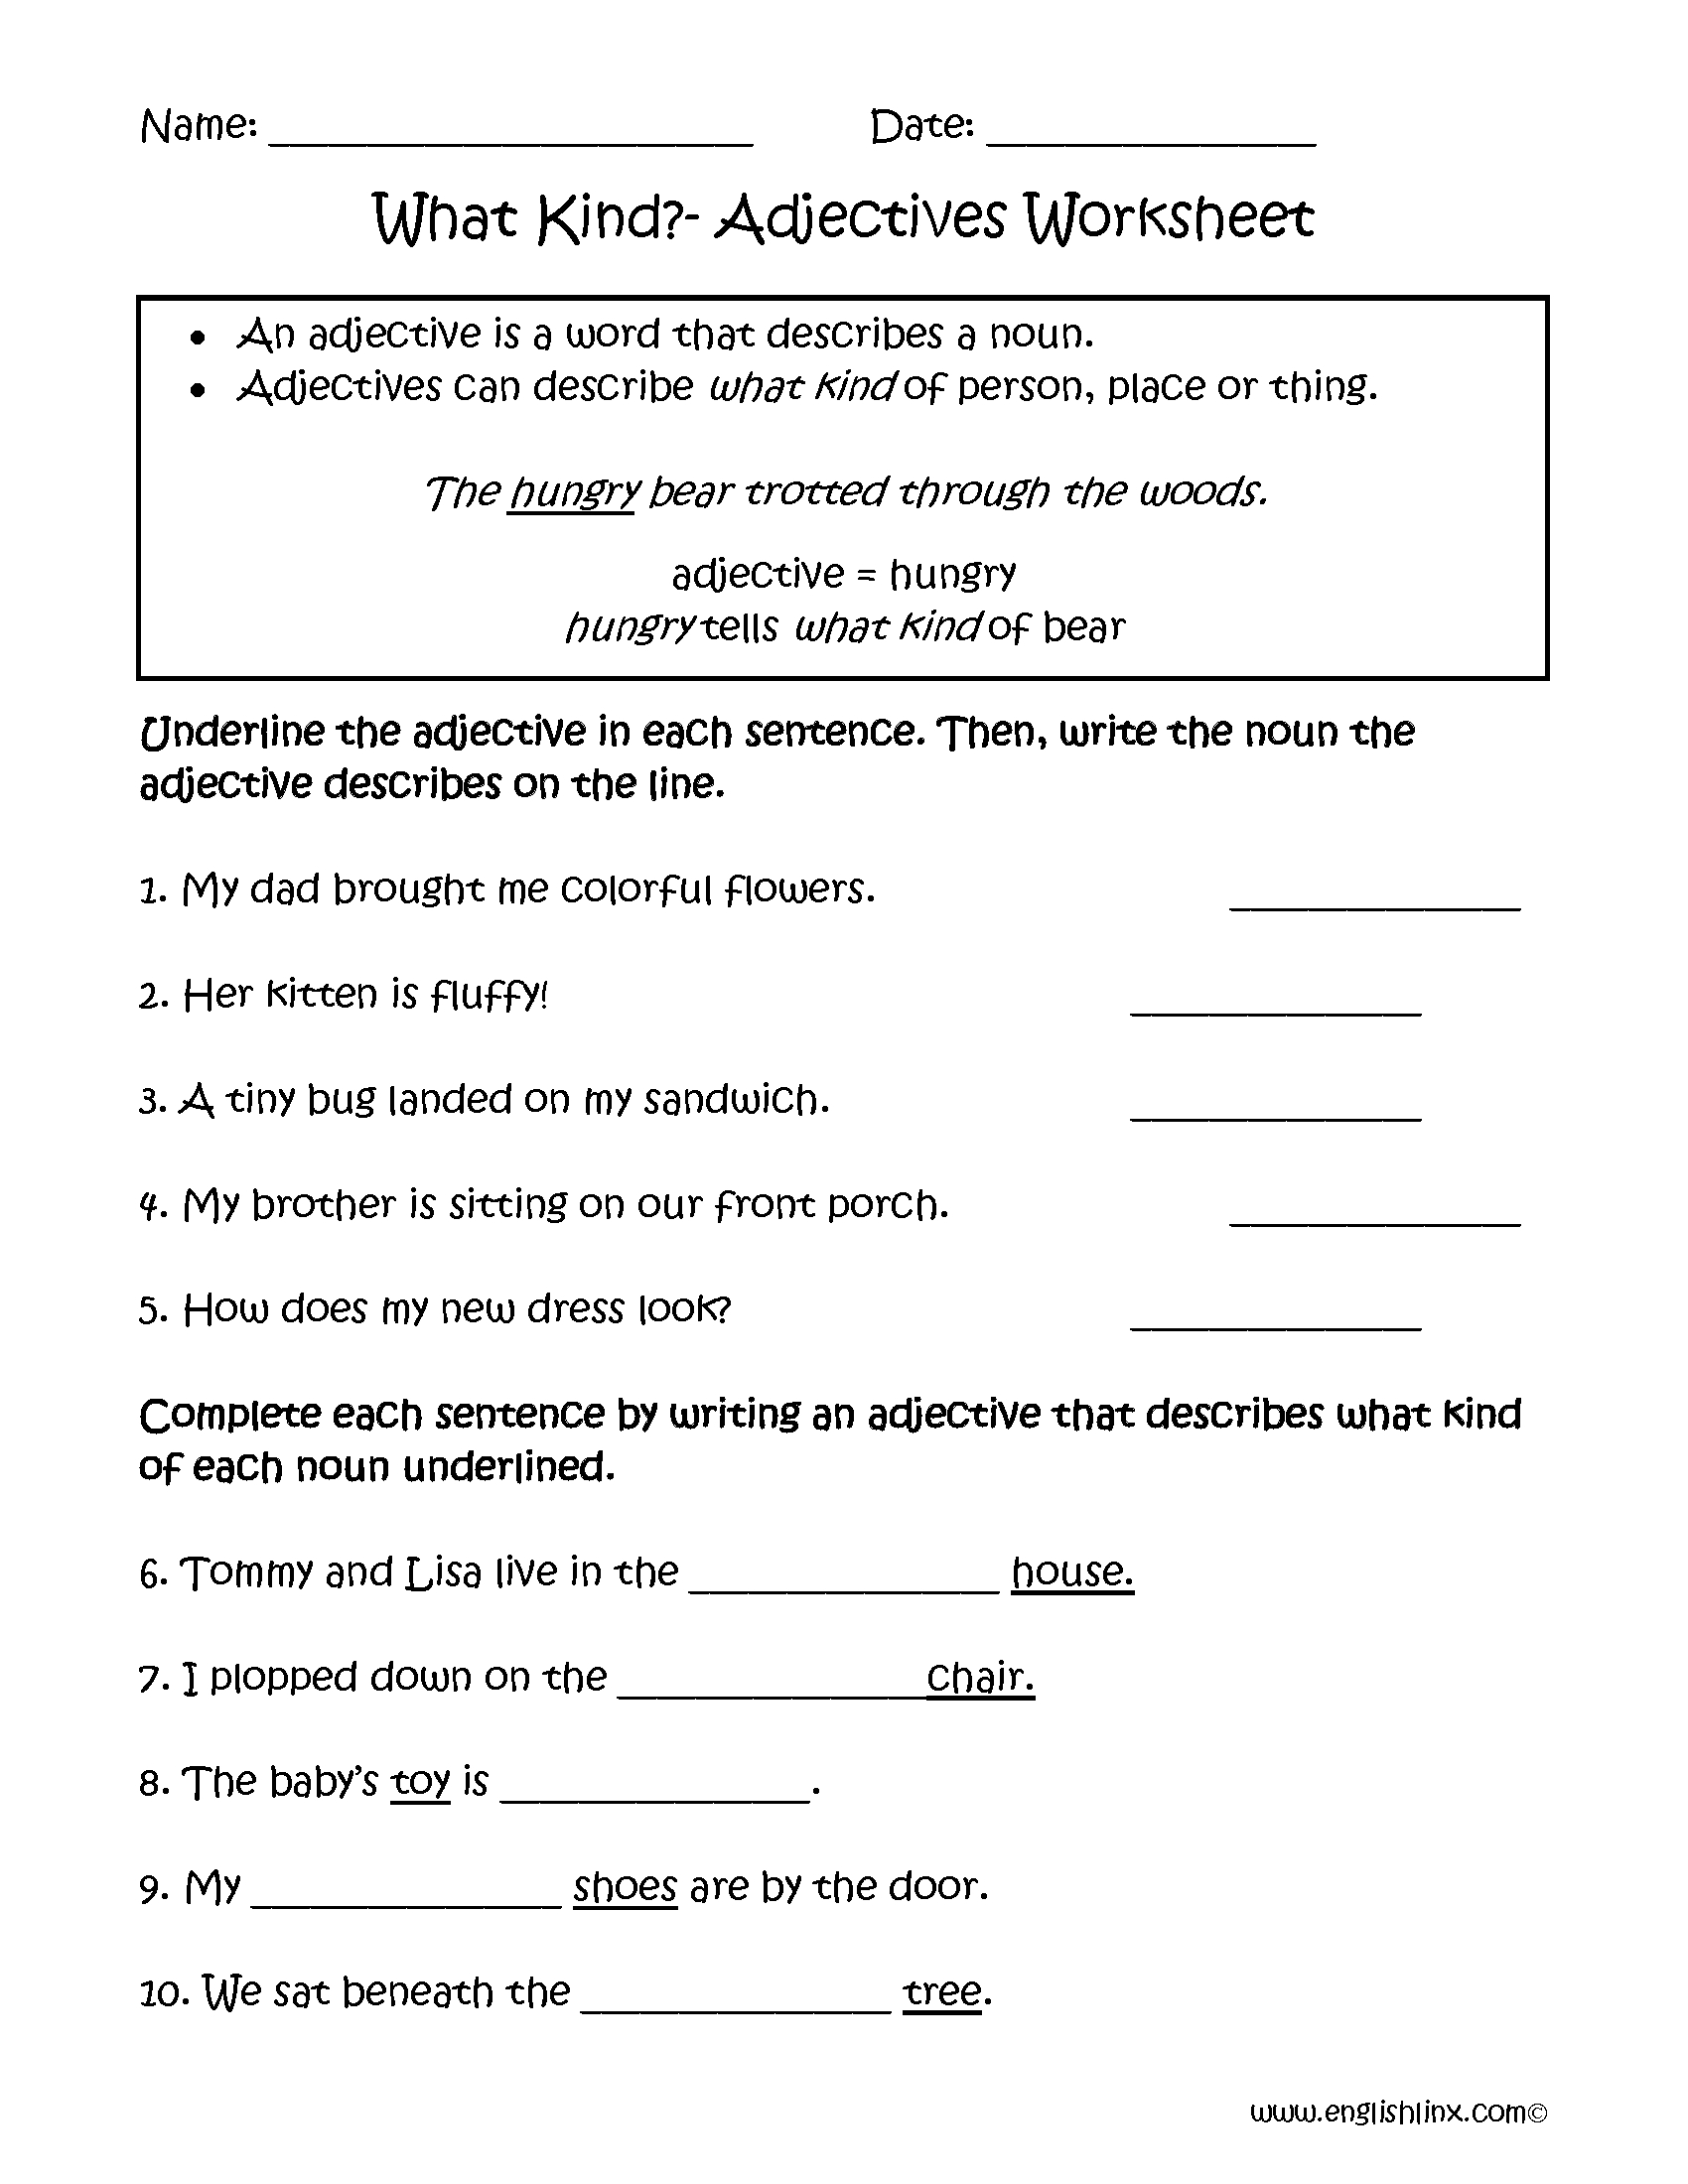 Adjectives Descriptive And Limiting Worksheets